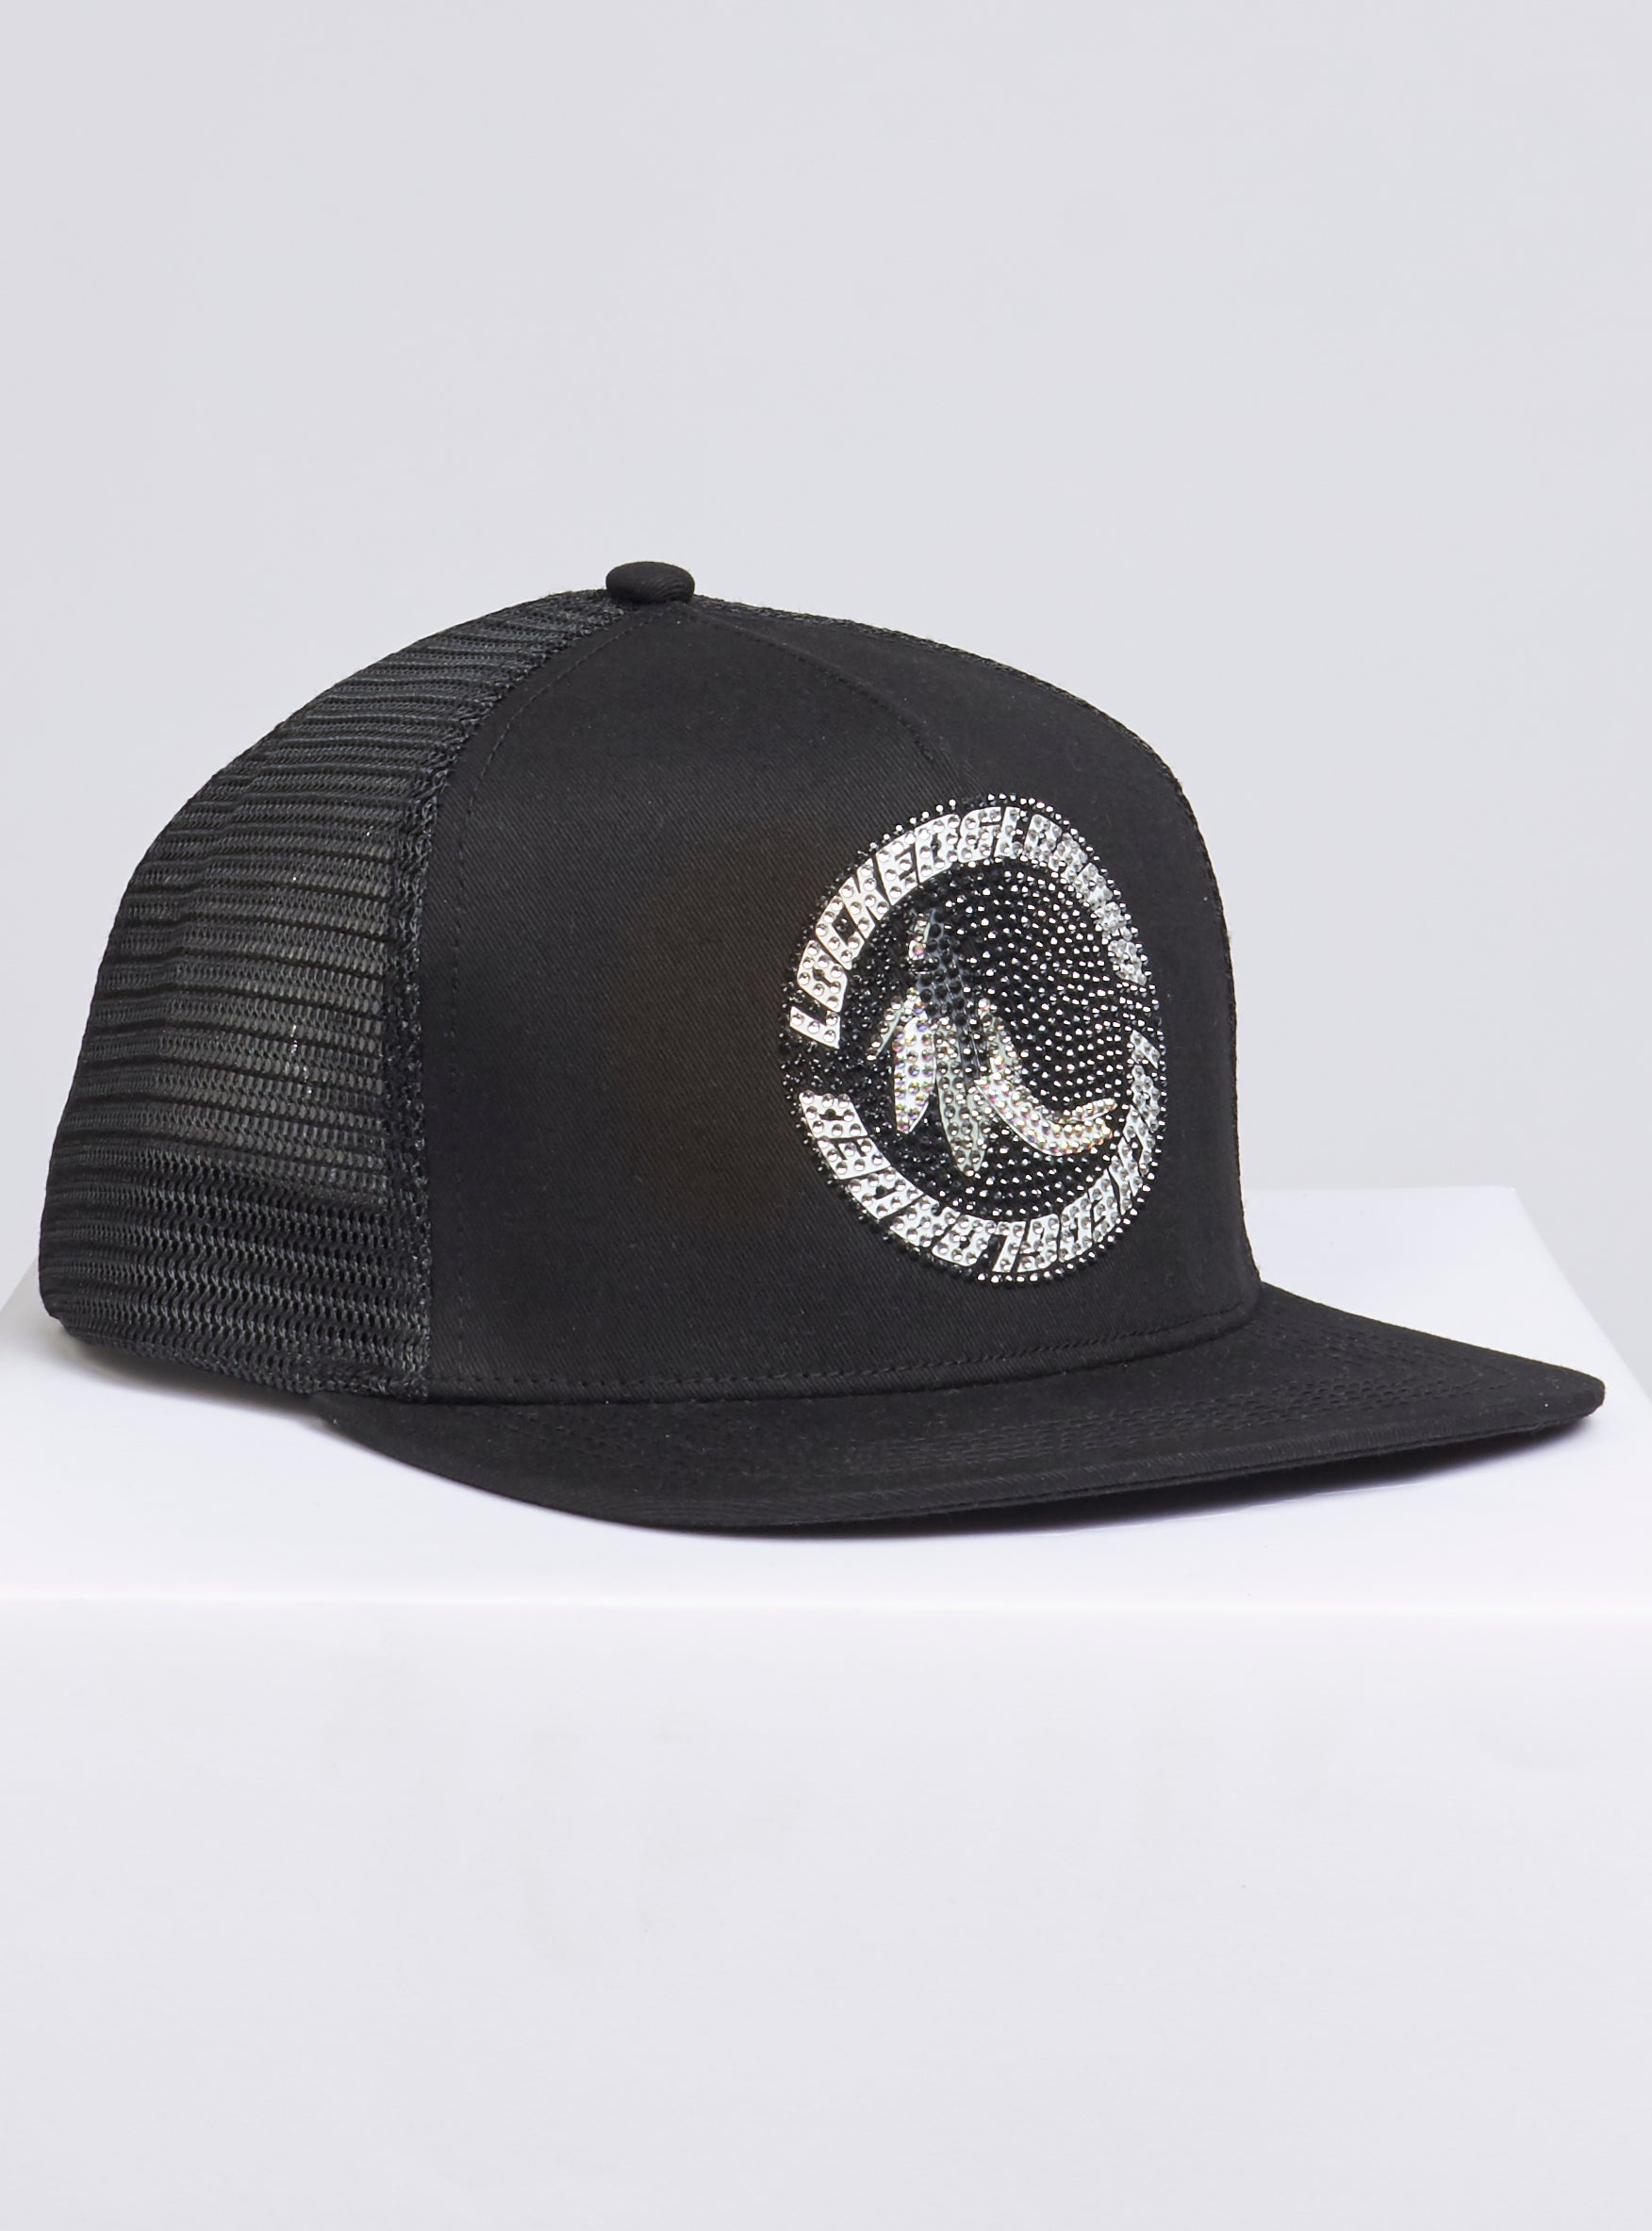 Locked & Loaded Snapback - B. Clip - Black with Silver on Black - 100